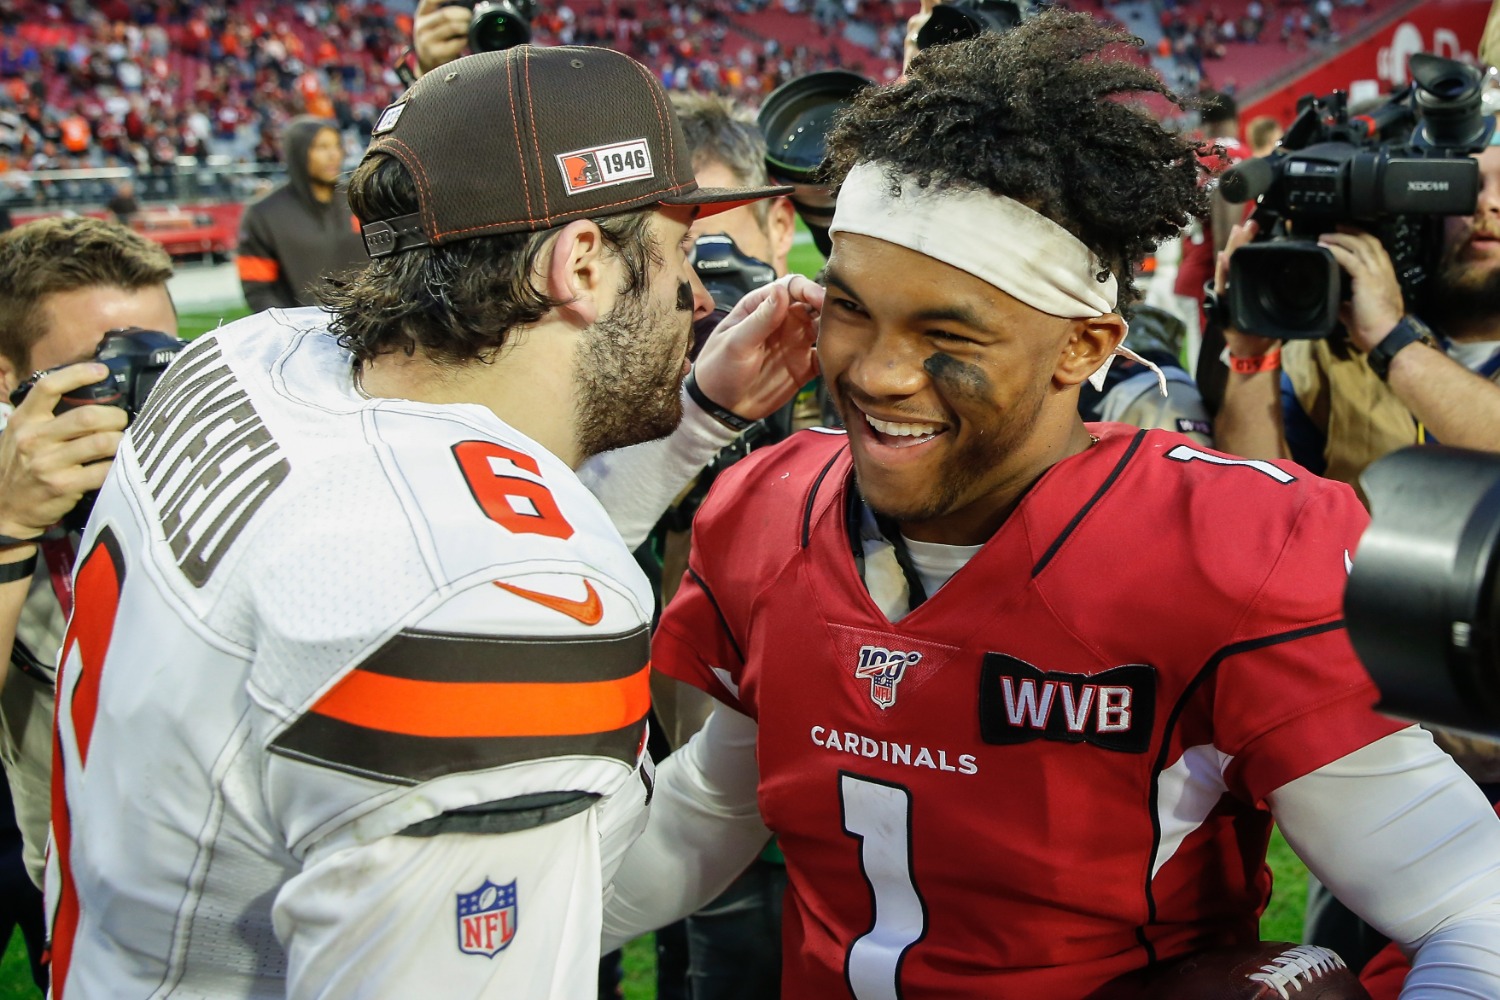 The Arizona Cardinals could guarantee Kyler Murray becomes a breakout star by trading for Browns tight end David Njoku and his $7.7 million salary over the next two years.